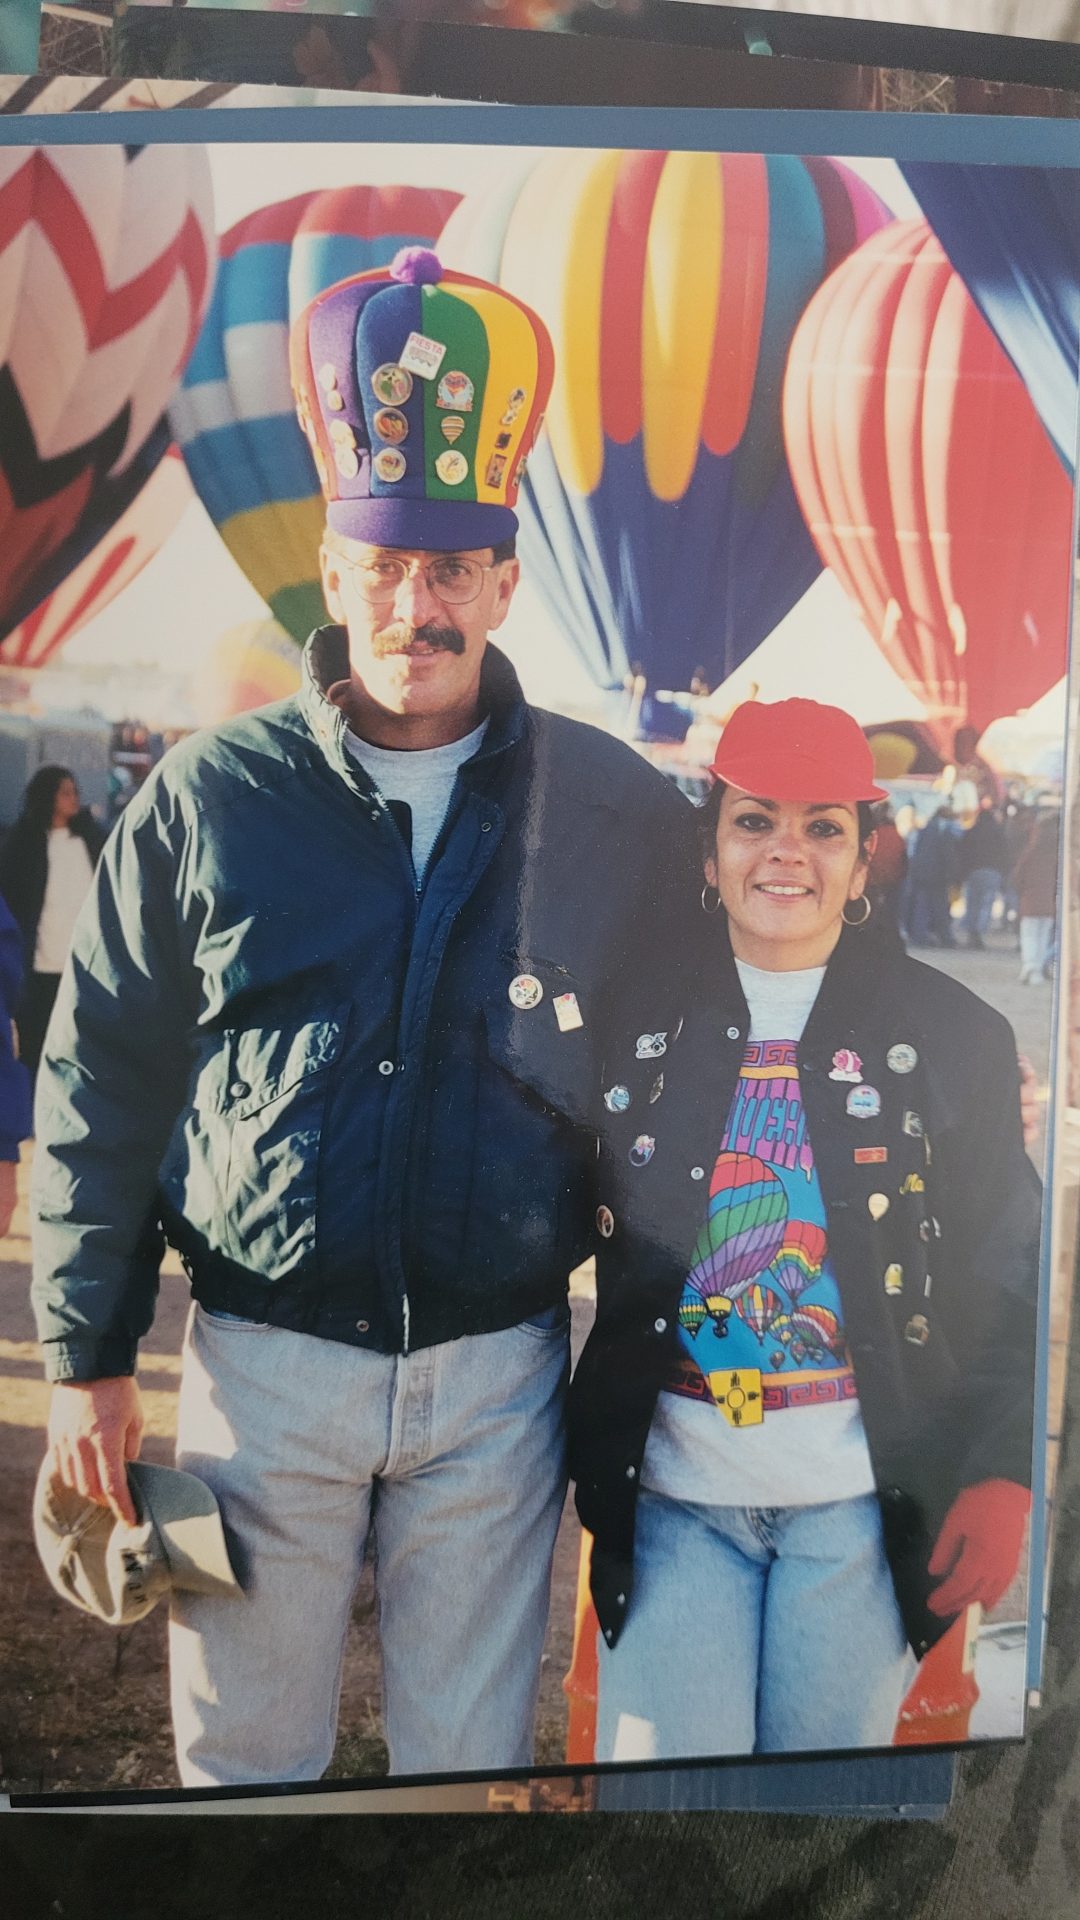 My parents doing what they loved...Hot Air Ballooning.